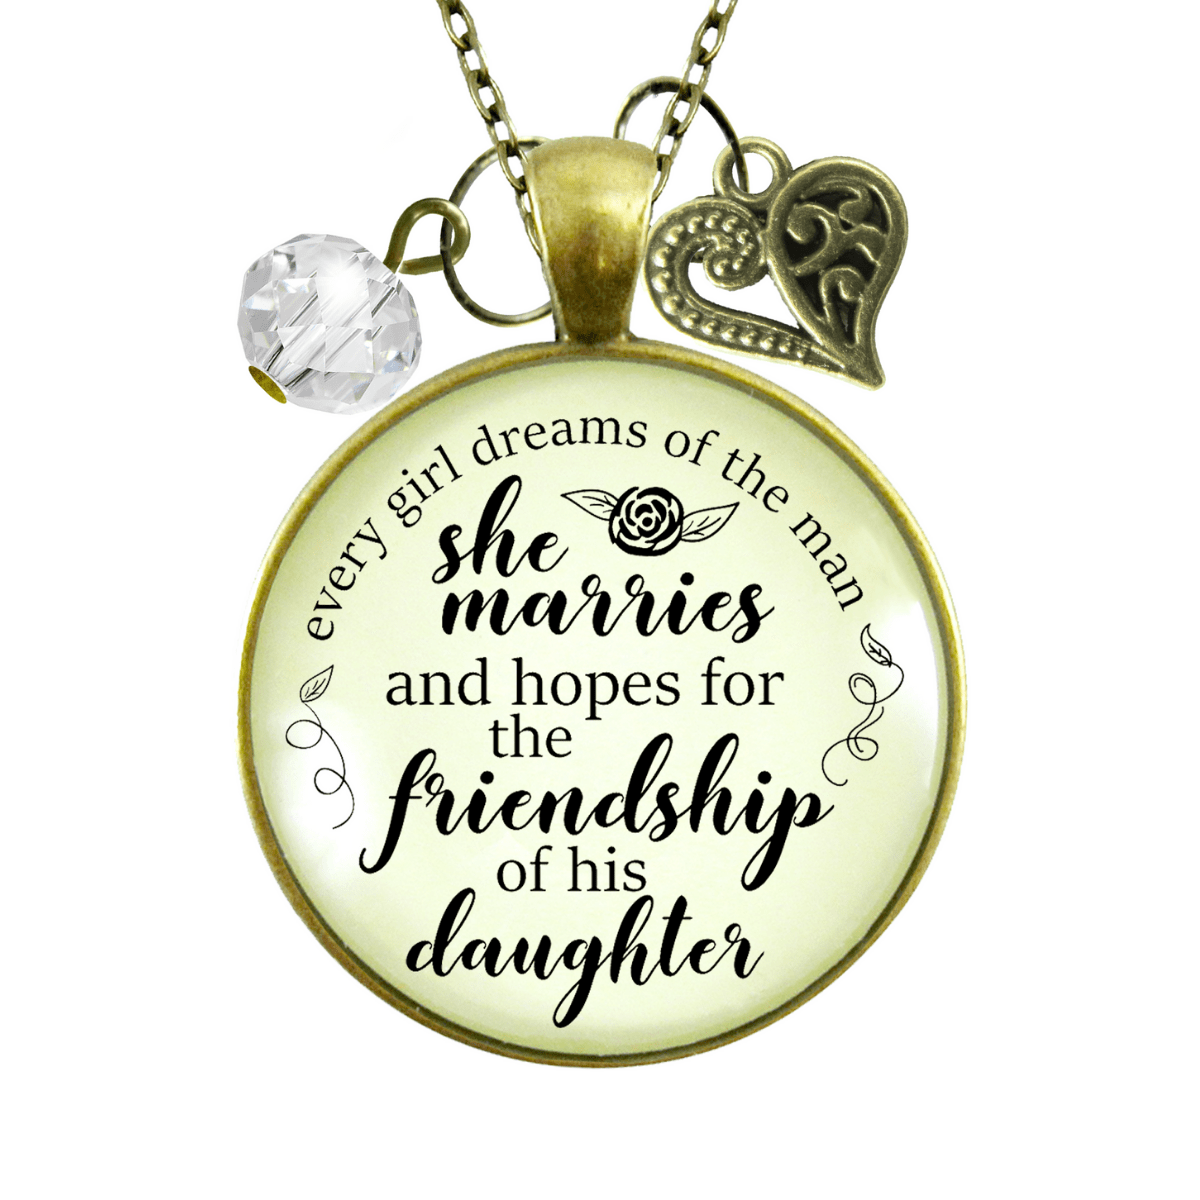 Gutsy Goodness To Stepdaughter Necklace Dream of Friendship From Bonus Step Mother Wed Day Gift - Gutsy Goodness Handmade Jewelry;To Stepdaughter Necklace Dream Of Friendship From Bonus Step Mother Wed Day Gift - Gutsy Goodness Handmade Jewelry Gifts